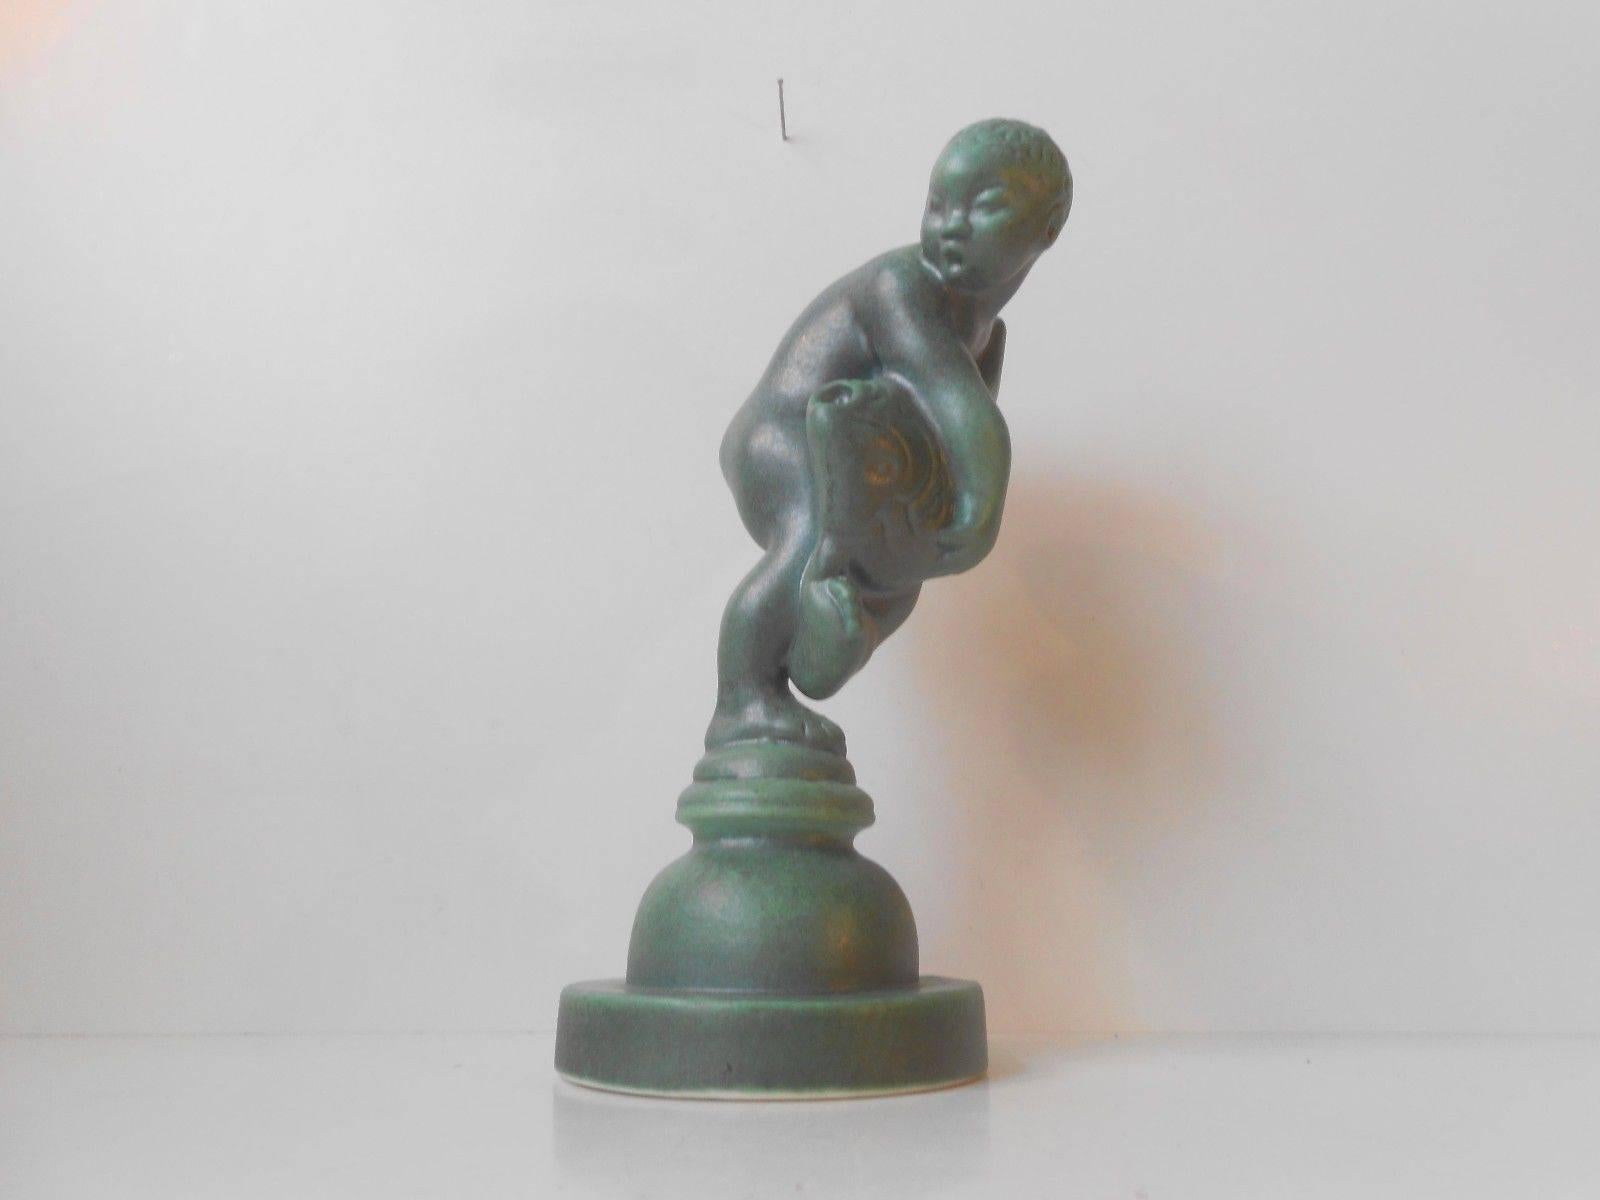 Measurements and infos:

Type: figurine of boy and fish. 

Height: Approximately 21 cm (8.5 inches).

Base diameter: Approximately 9 cm (3.75 inches).

Material: terracotta with 